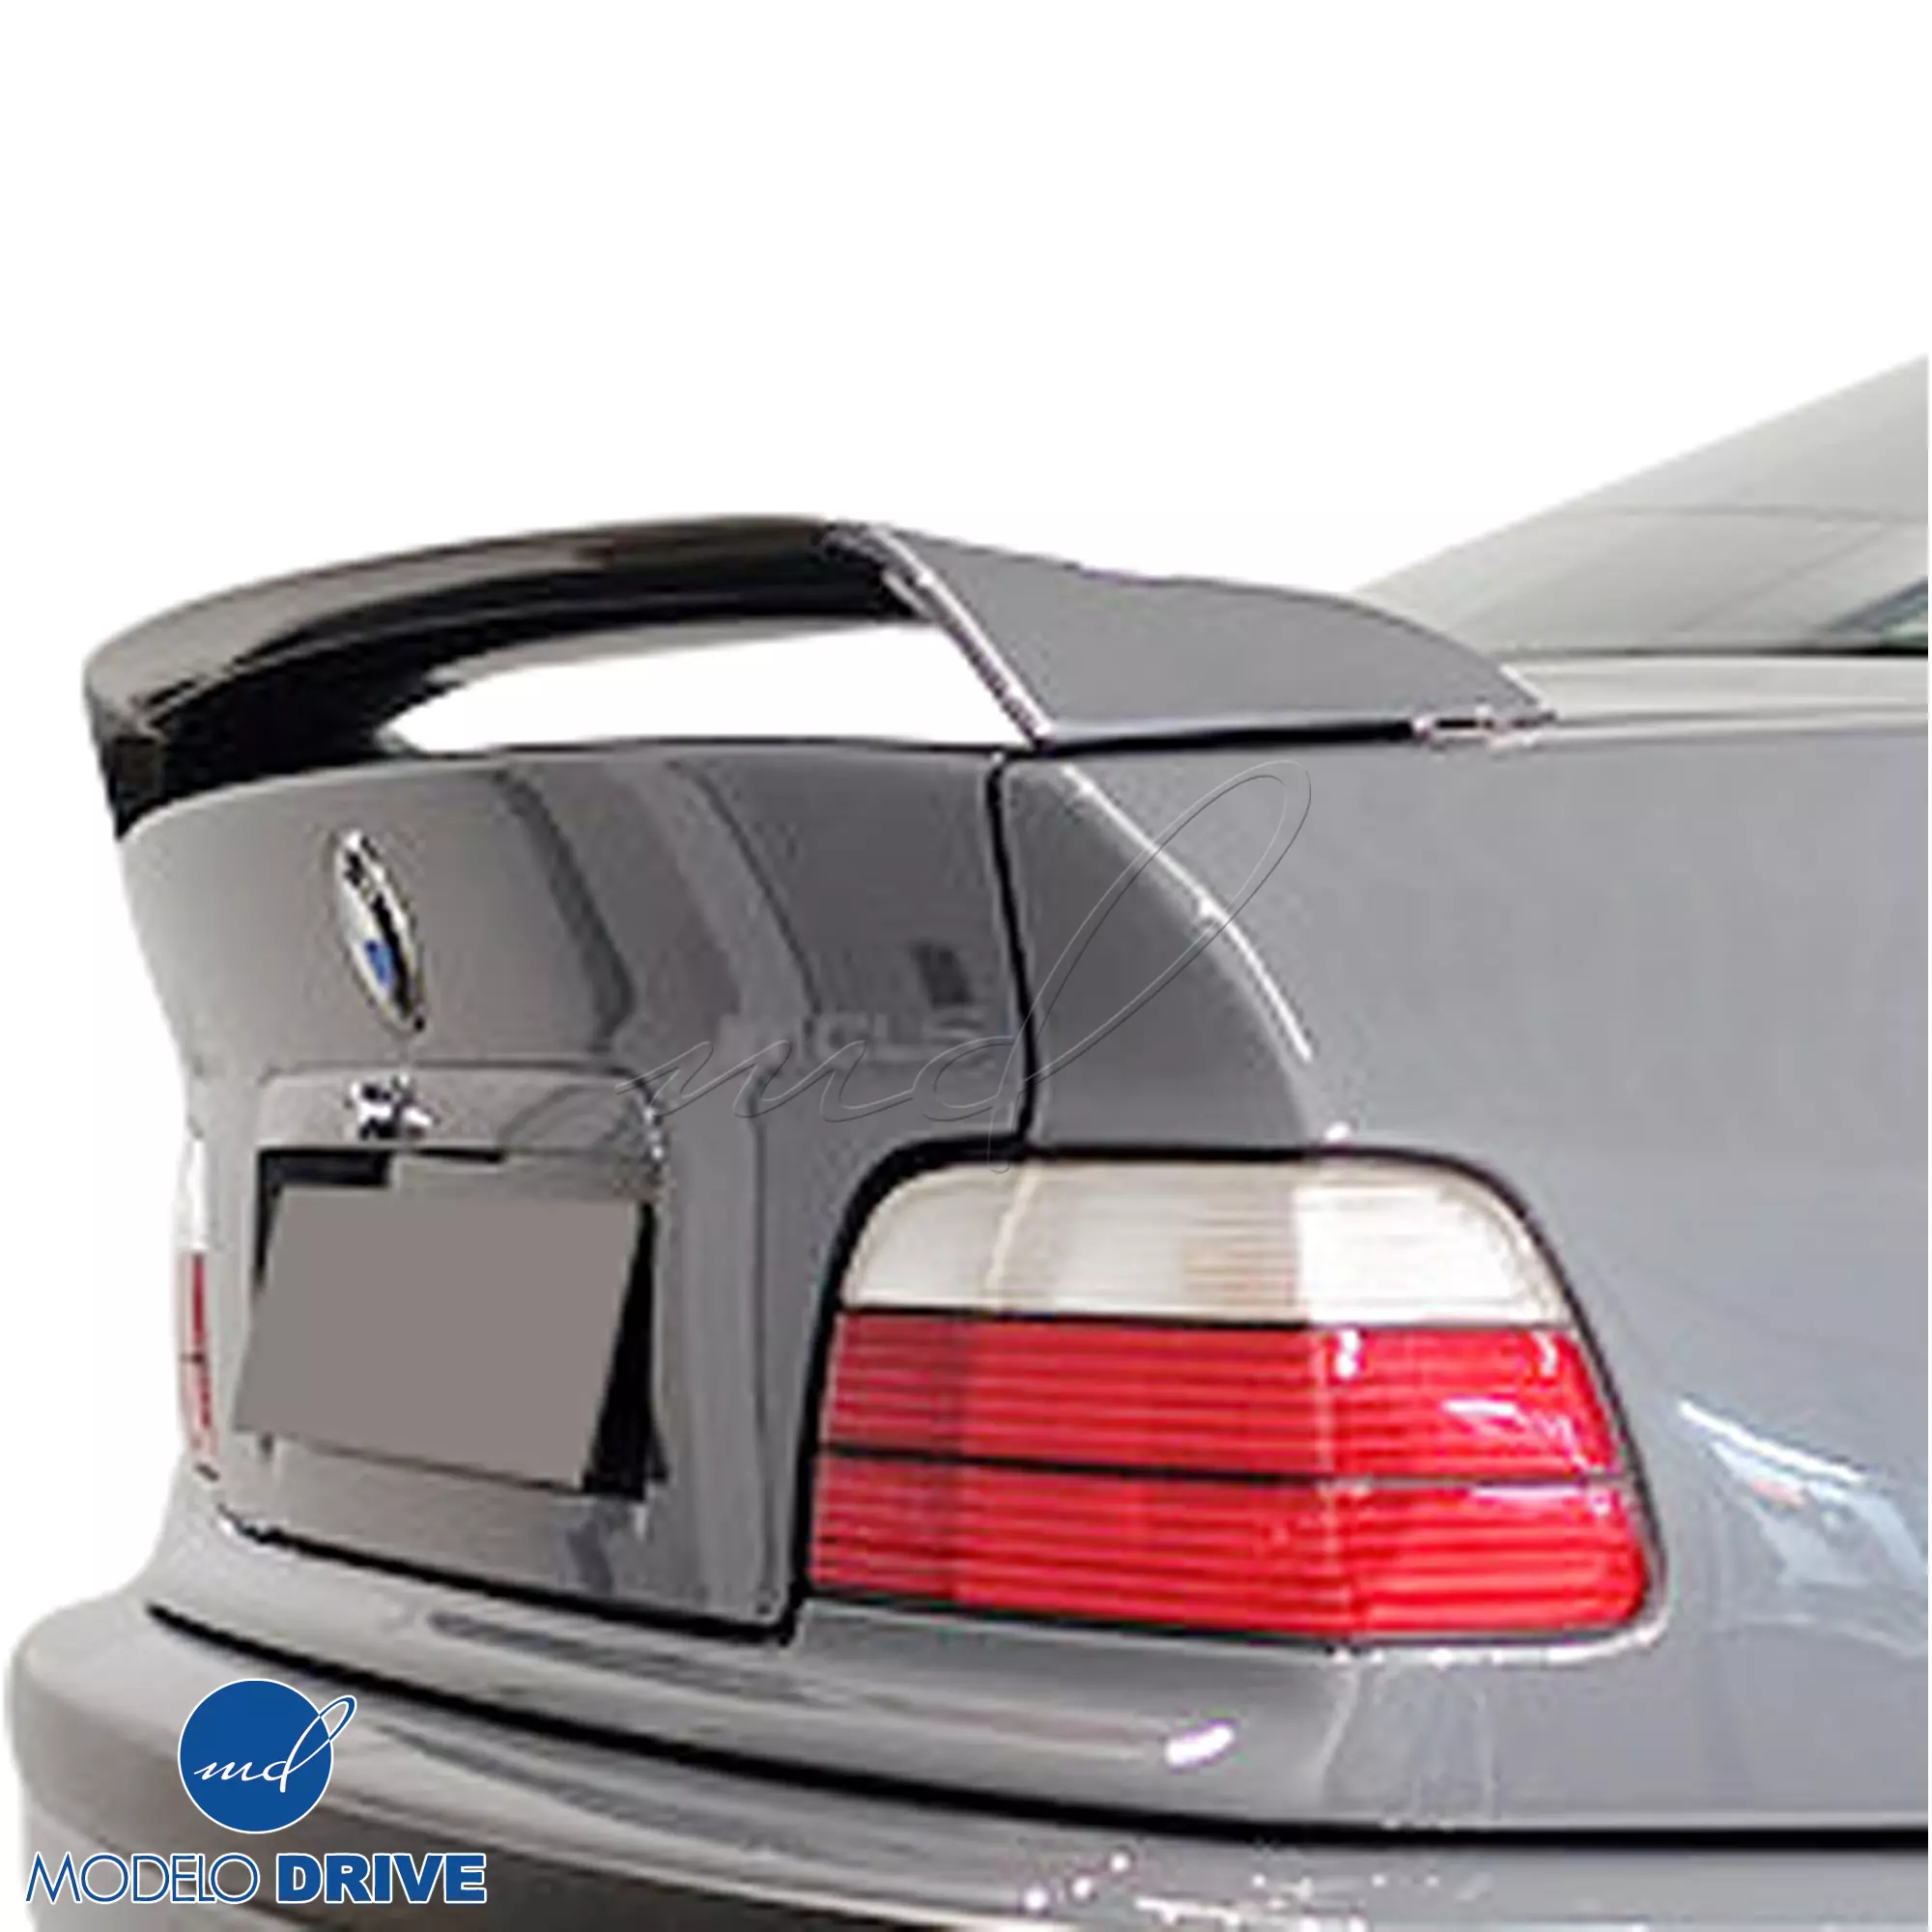 ModeloDrive FRP ASCH Spoiler Wing > BMW 3-Series E36 1992-1998 > 2dr - Image 4